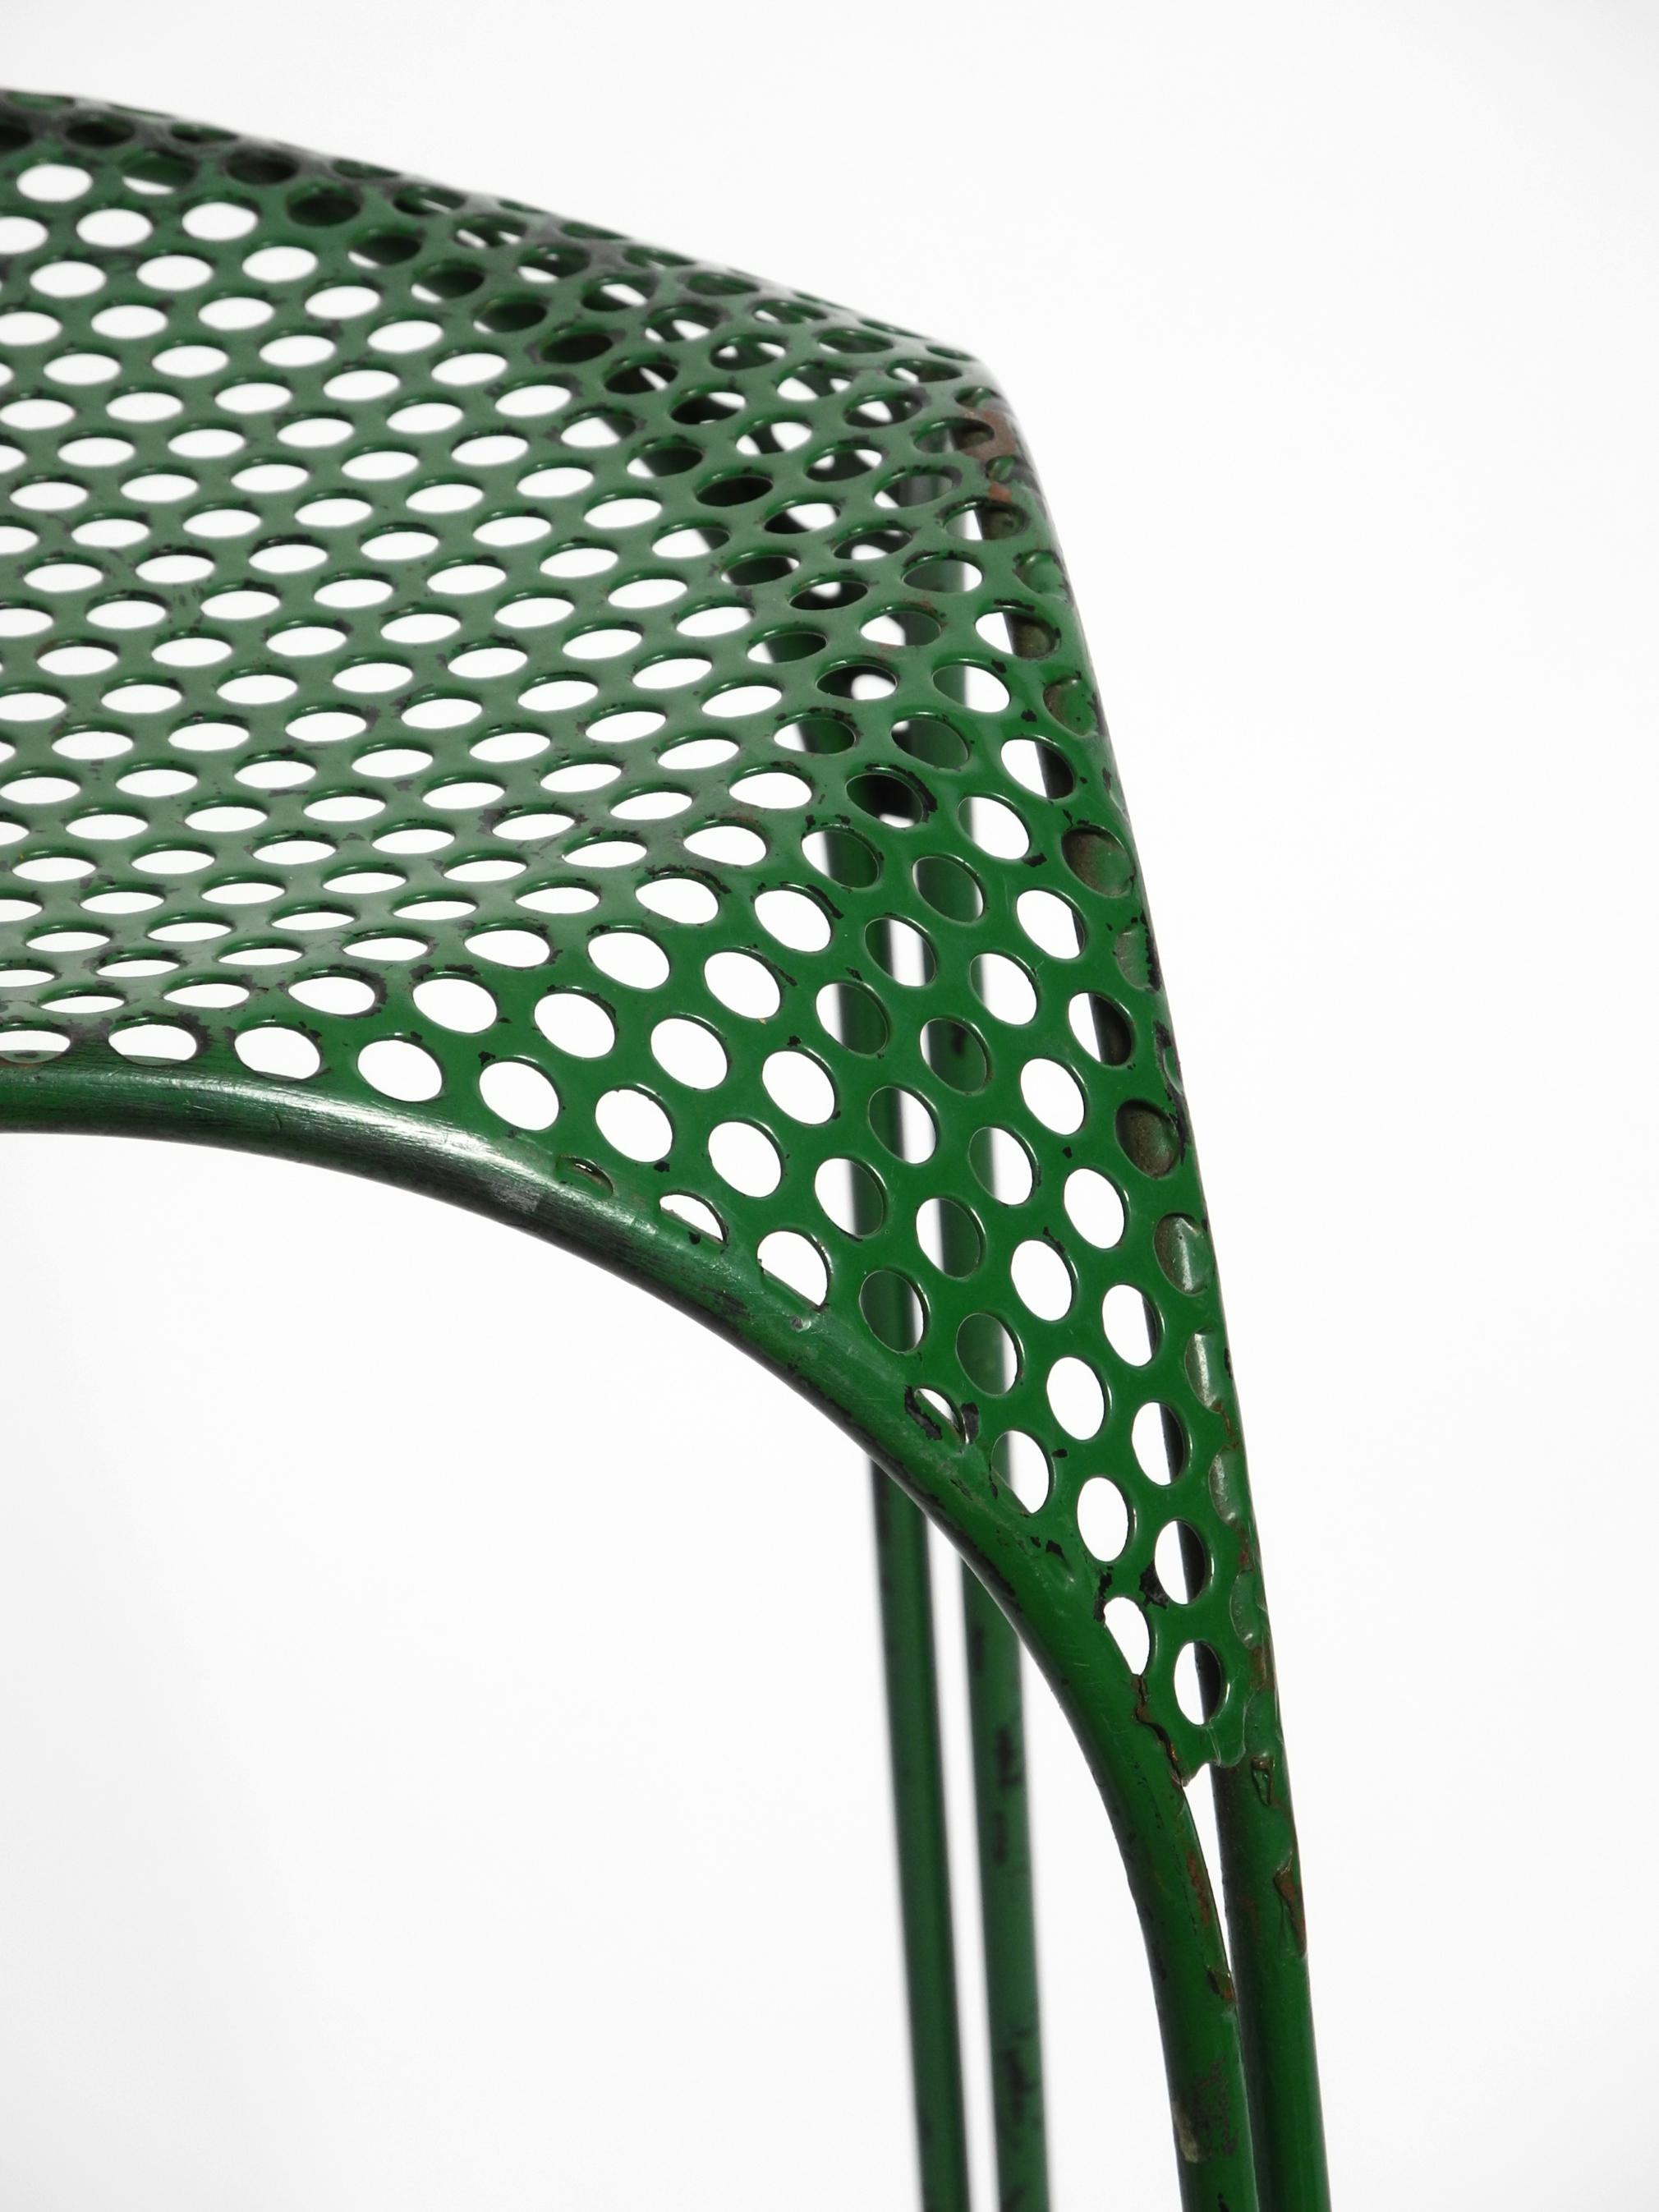 Italian 1960s bar stool made of green painted metal with perforated metal seat For Sale 8